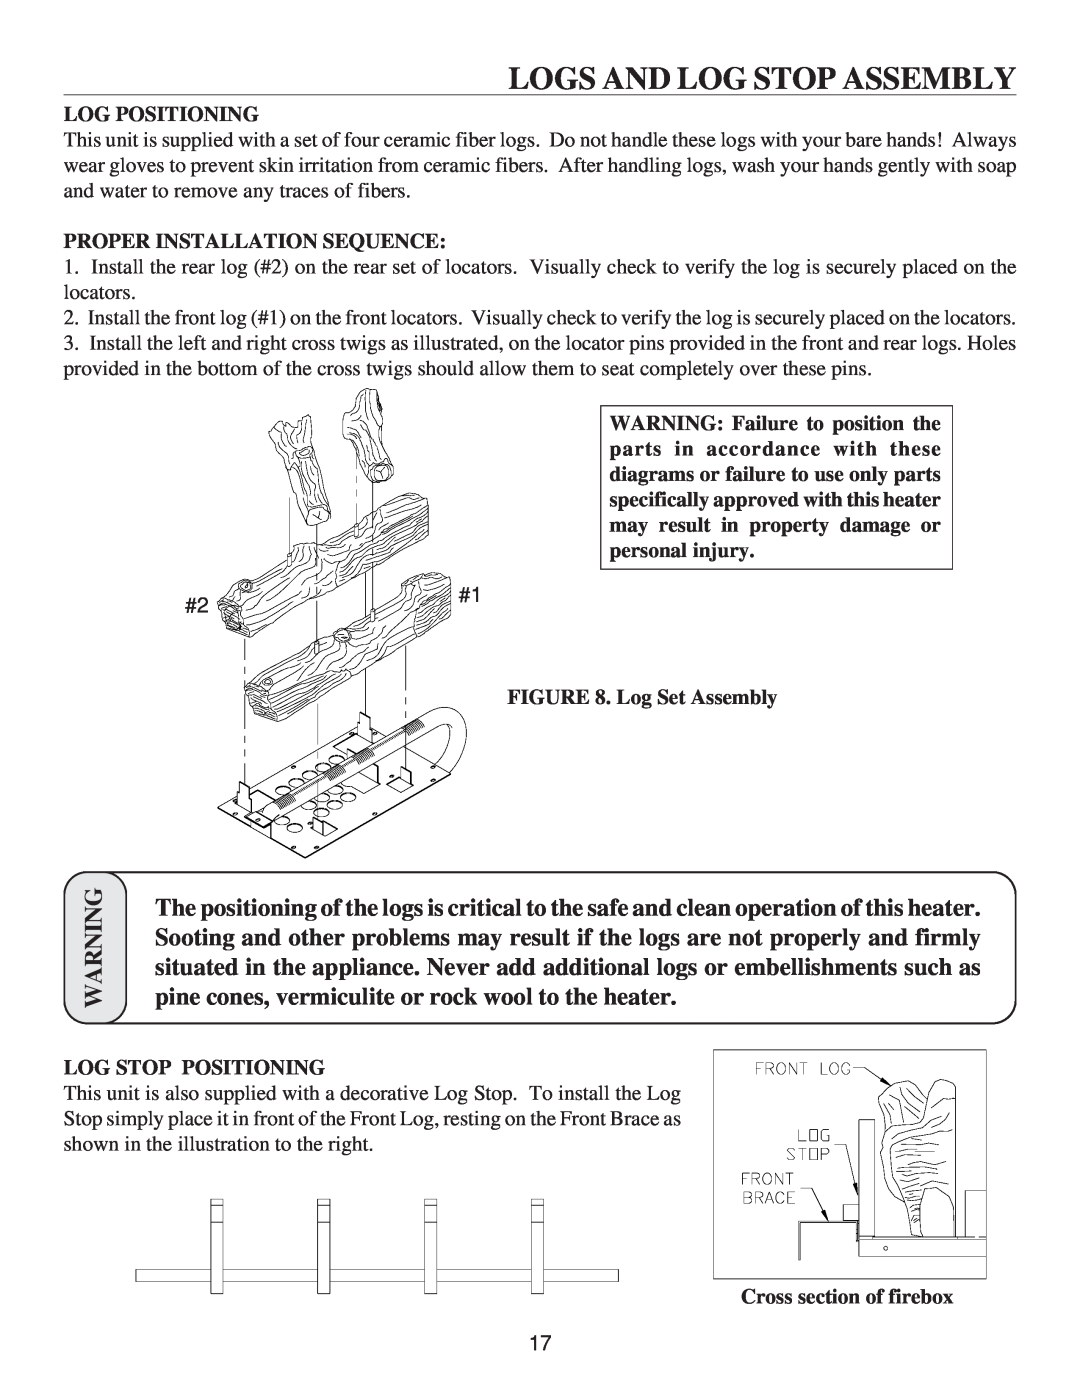 United States Stove VF30IL Logs And Log Stop Assembly, Log Positioning, Proper Installation Sequence, Log Set Assembly 